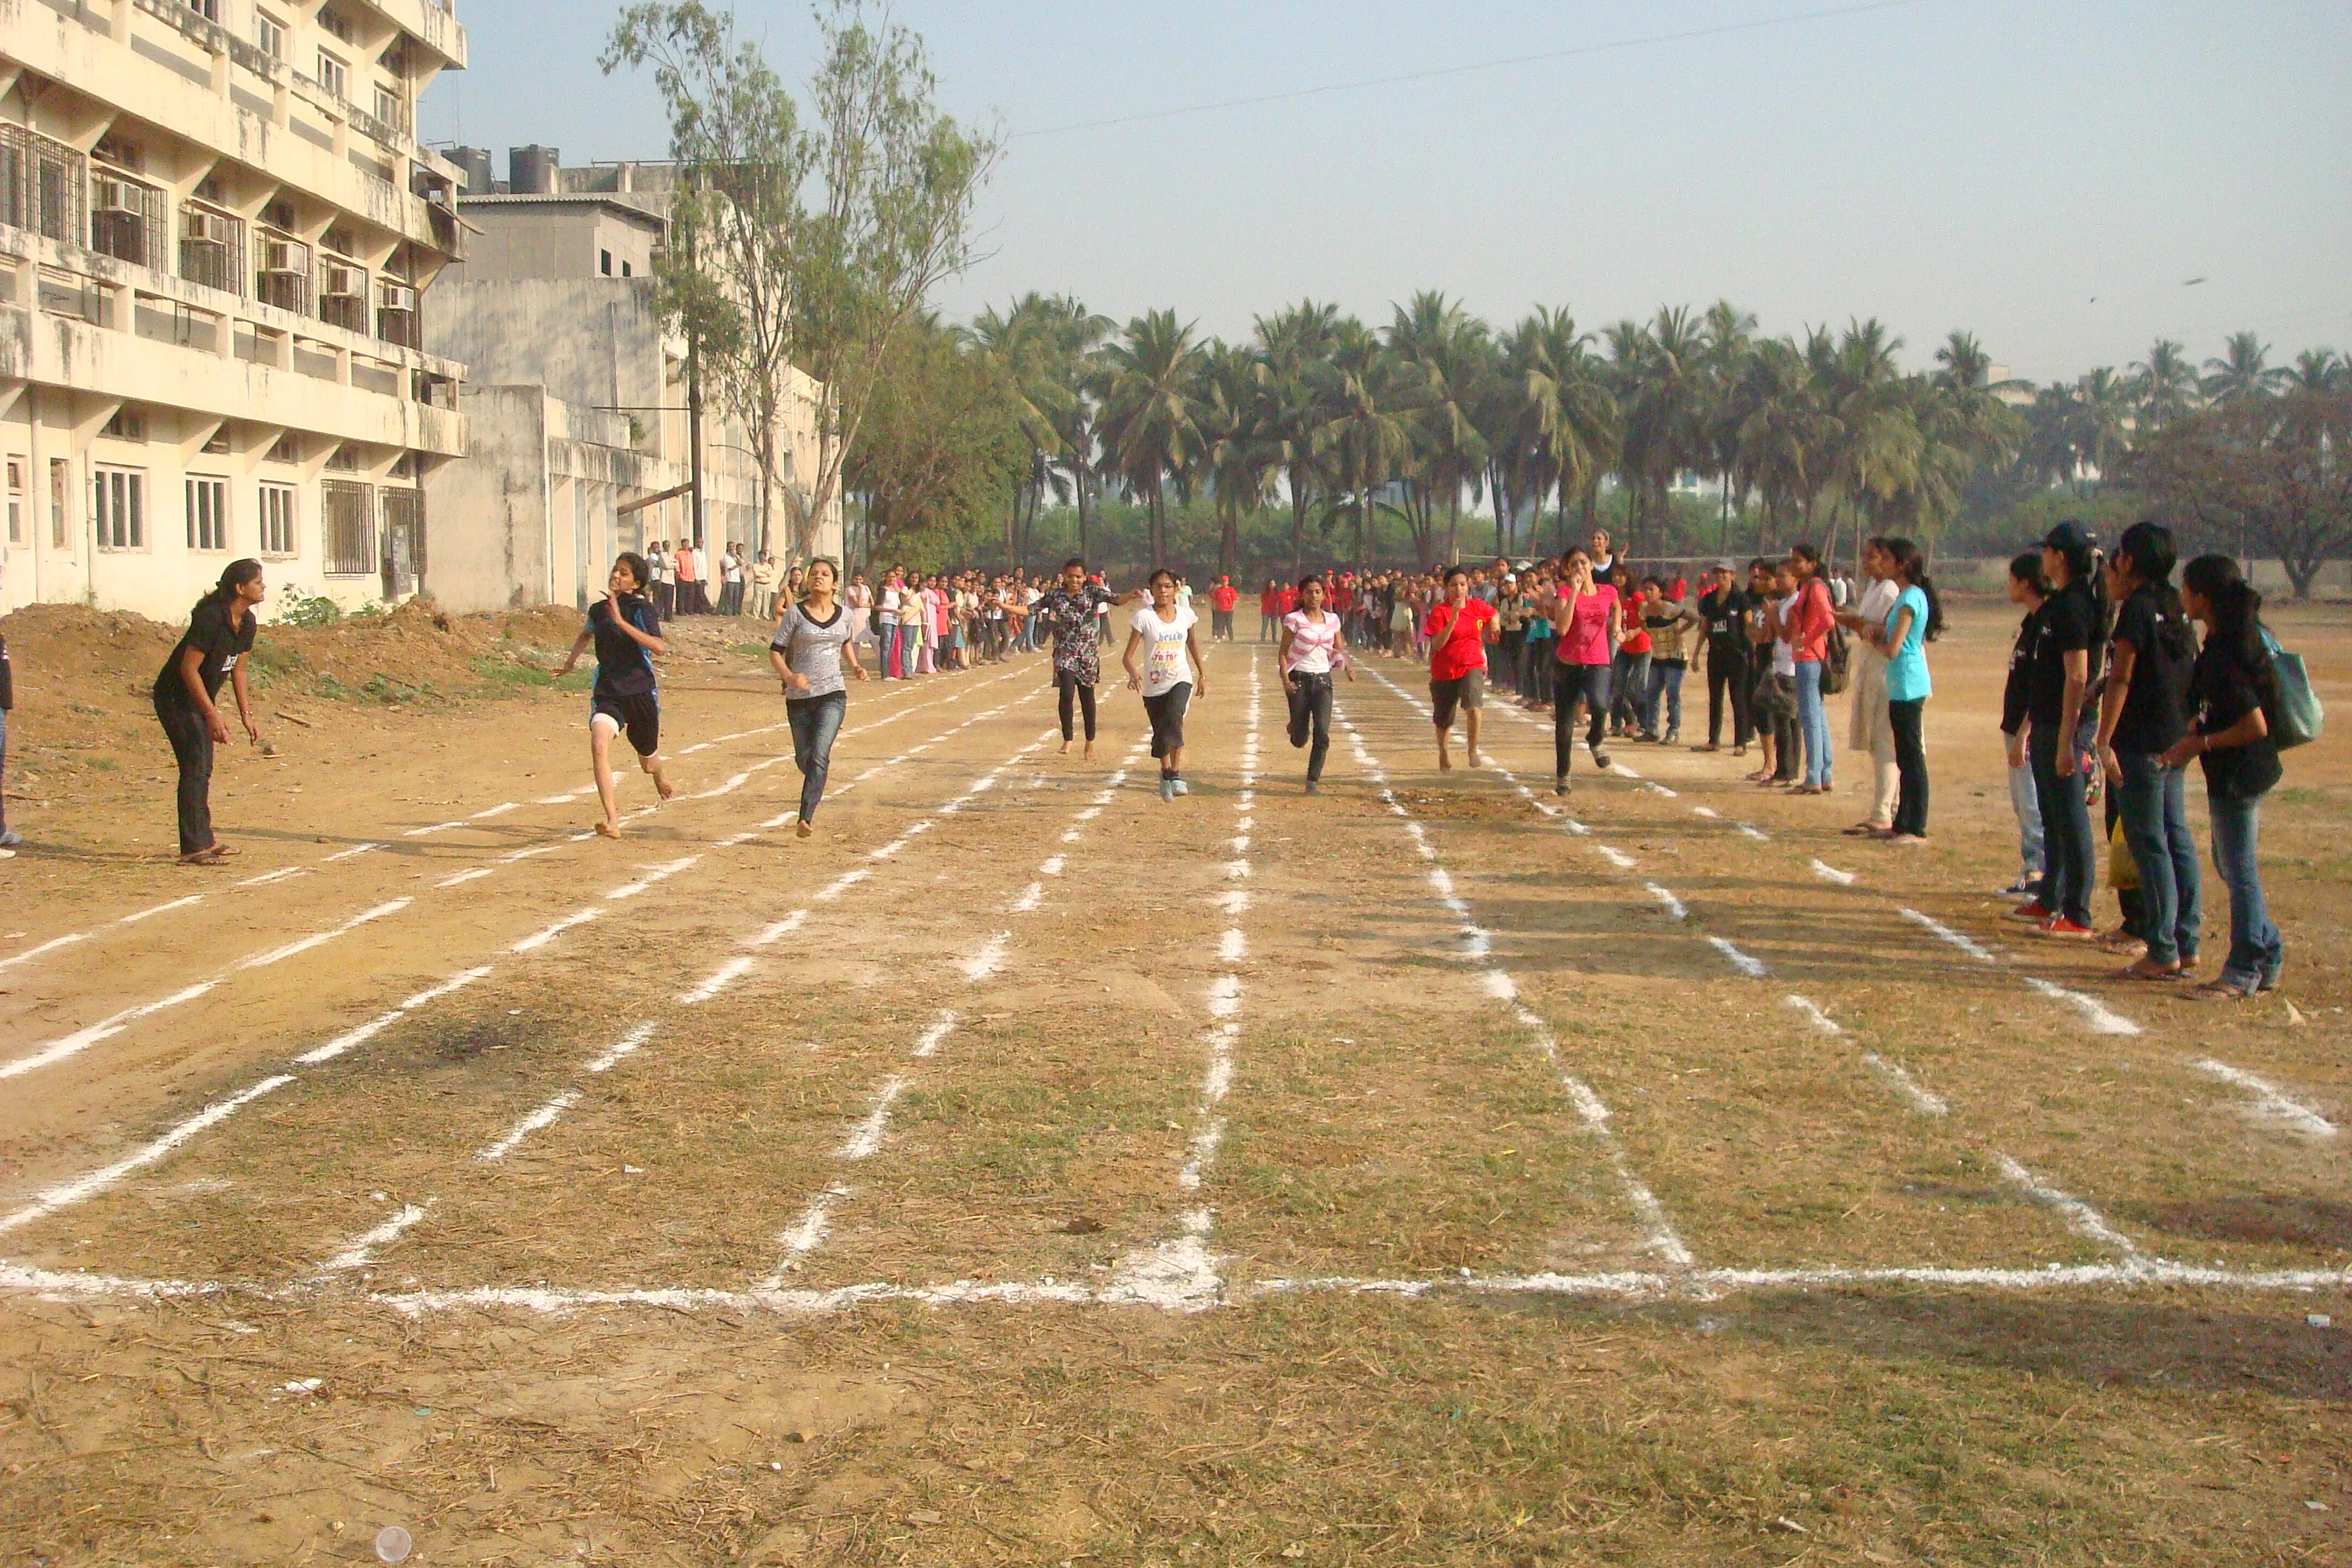 SPORTS GROUND - Two big Sports Grounds, on the campus, provide Recreational Facilities to the students. 